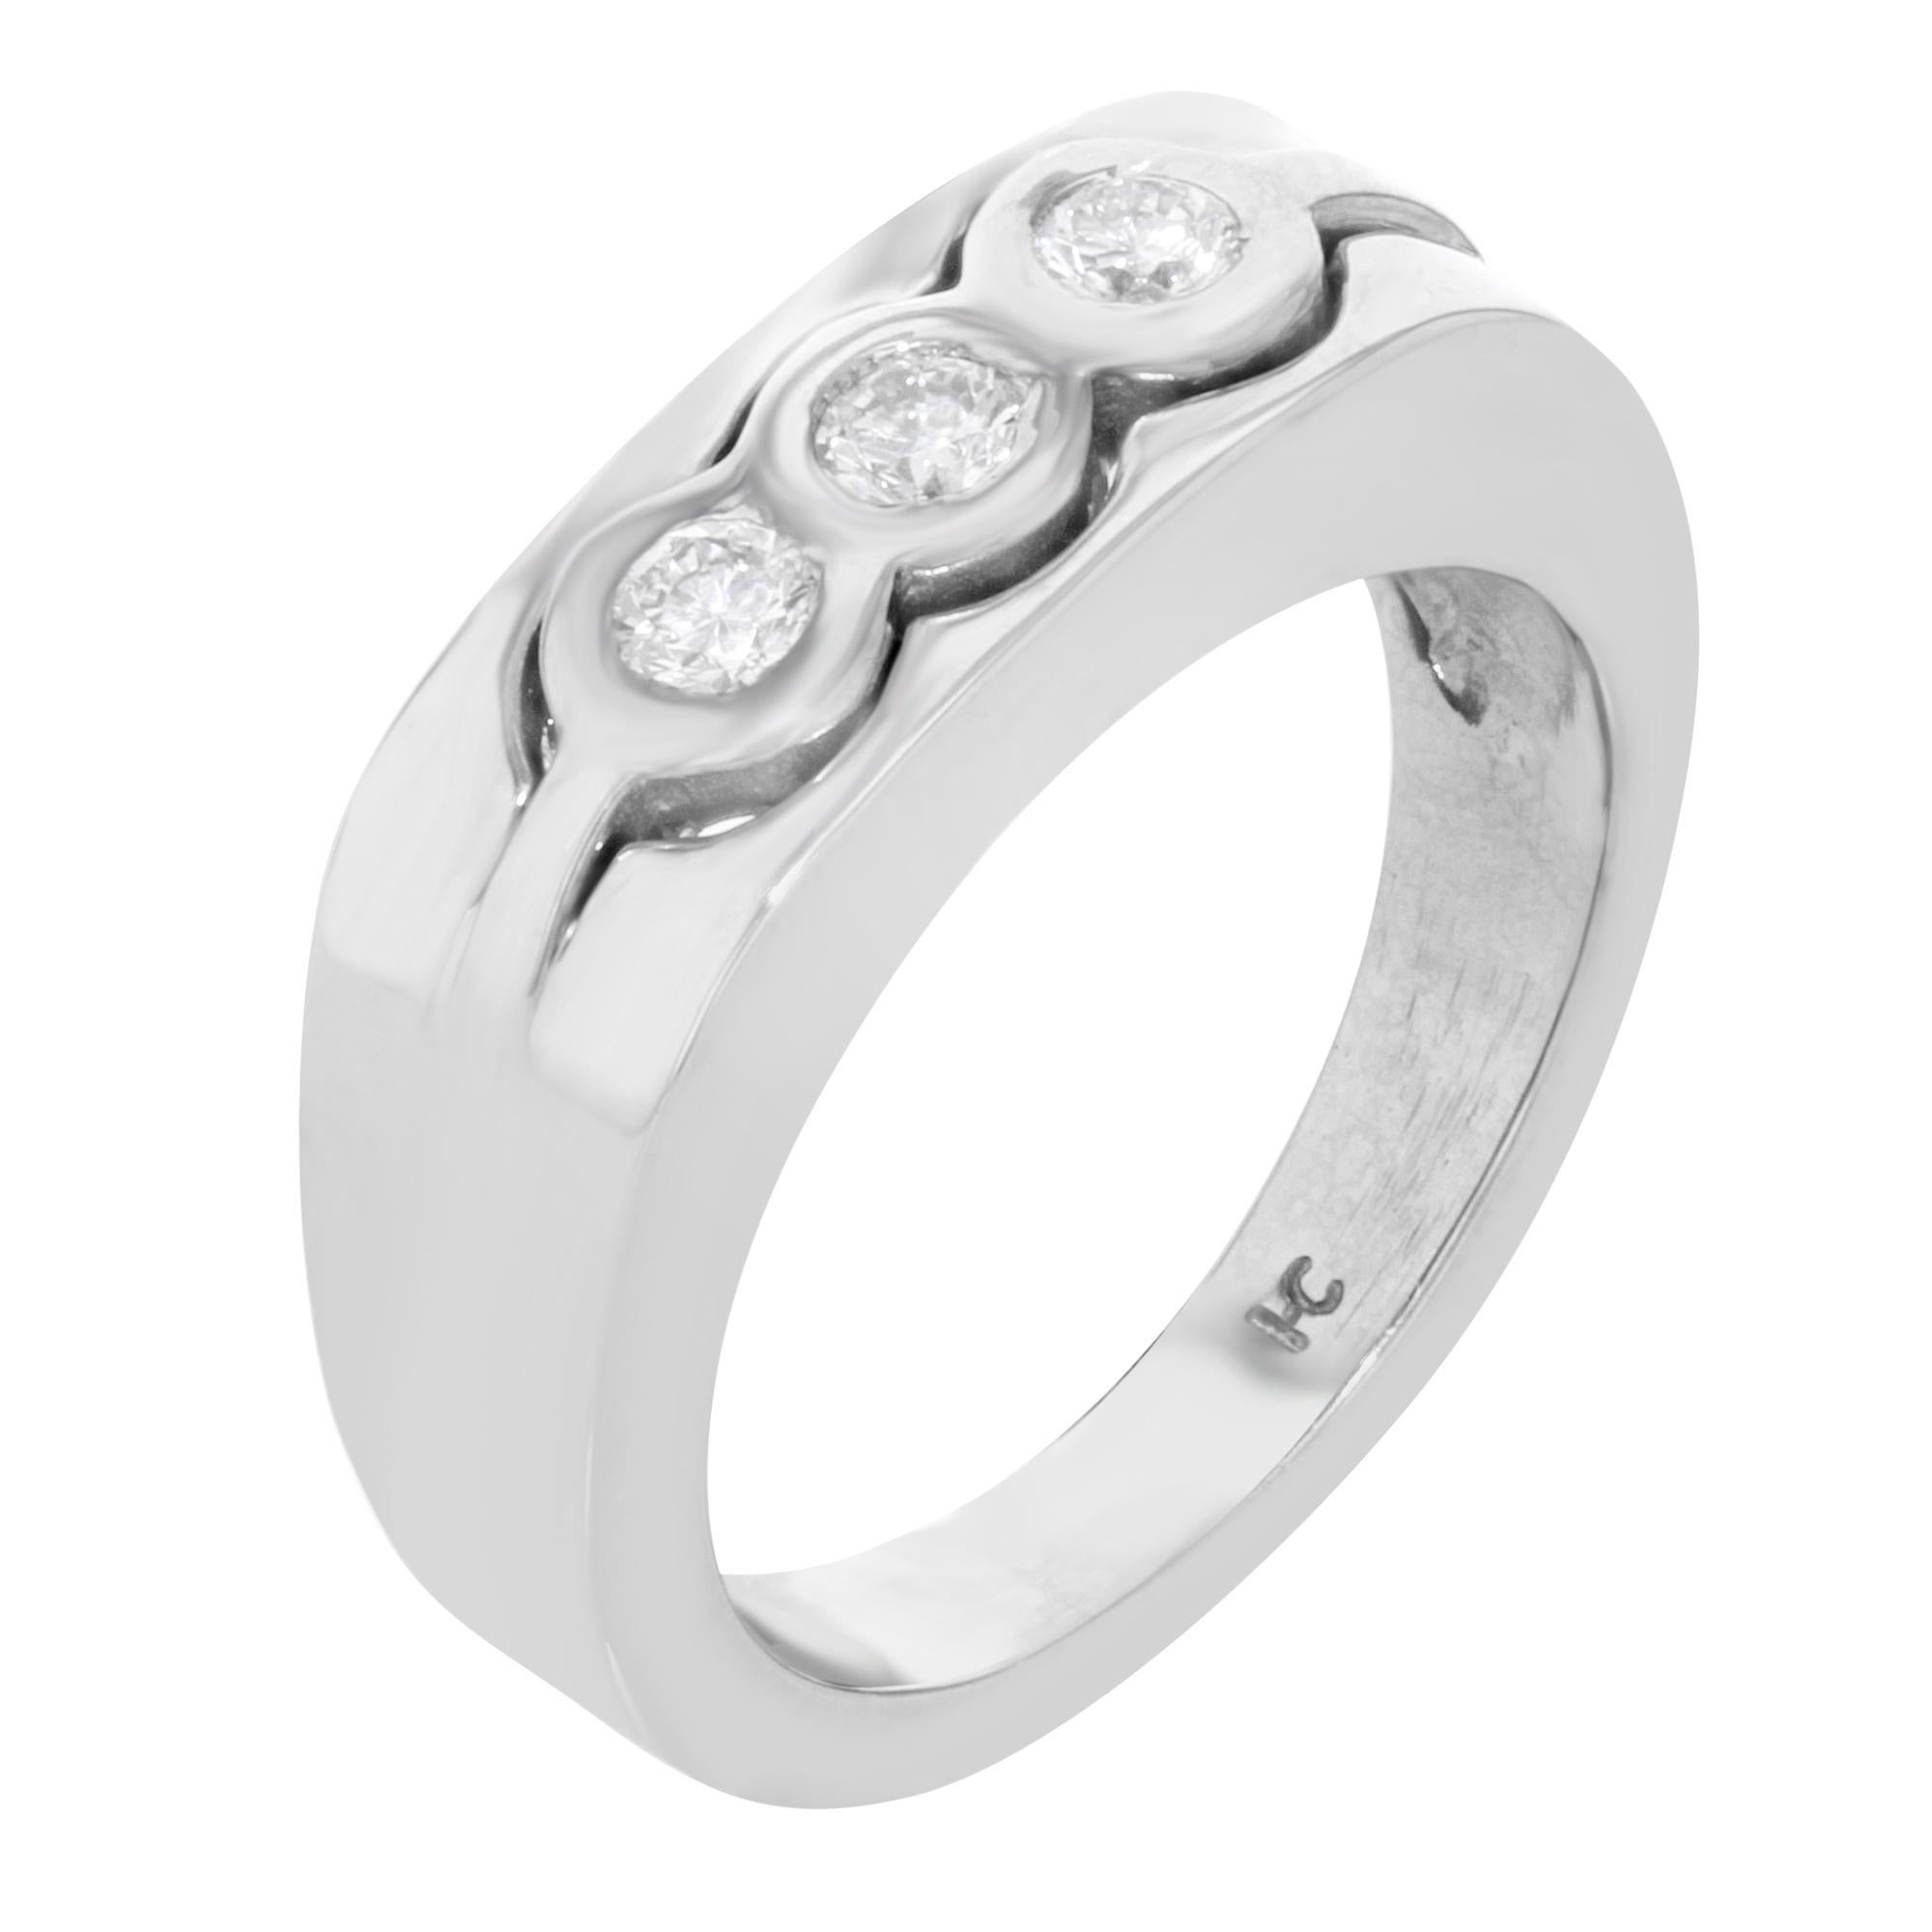 This ring is crafted in high polished 14k white gold and encrusted with approximately 0.40 Cttw of bezel set dazzling round brilliant cut diamonds. Band size 8. Total weight: 9.7 gms. Comes with a presentable gift box.